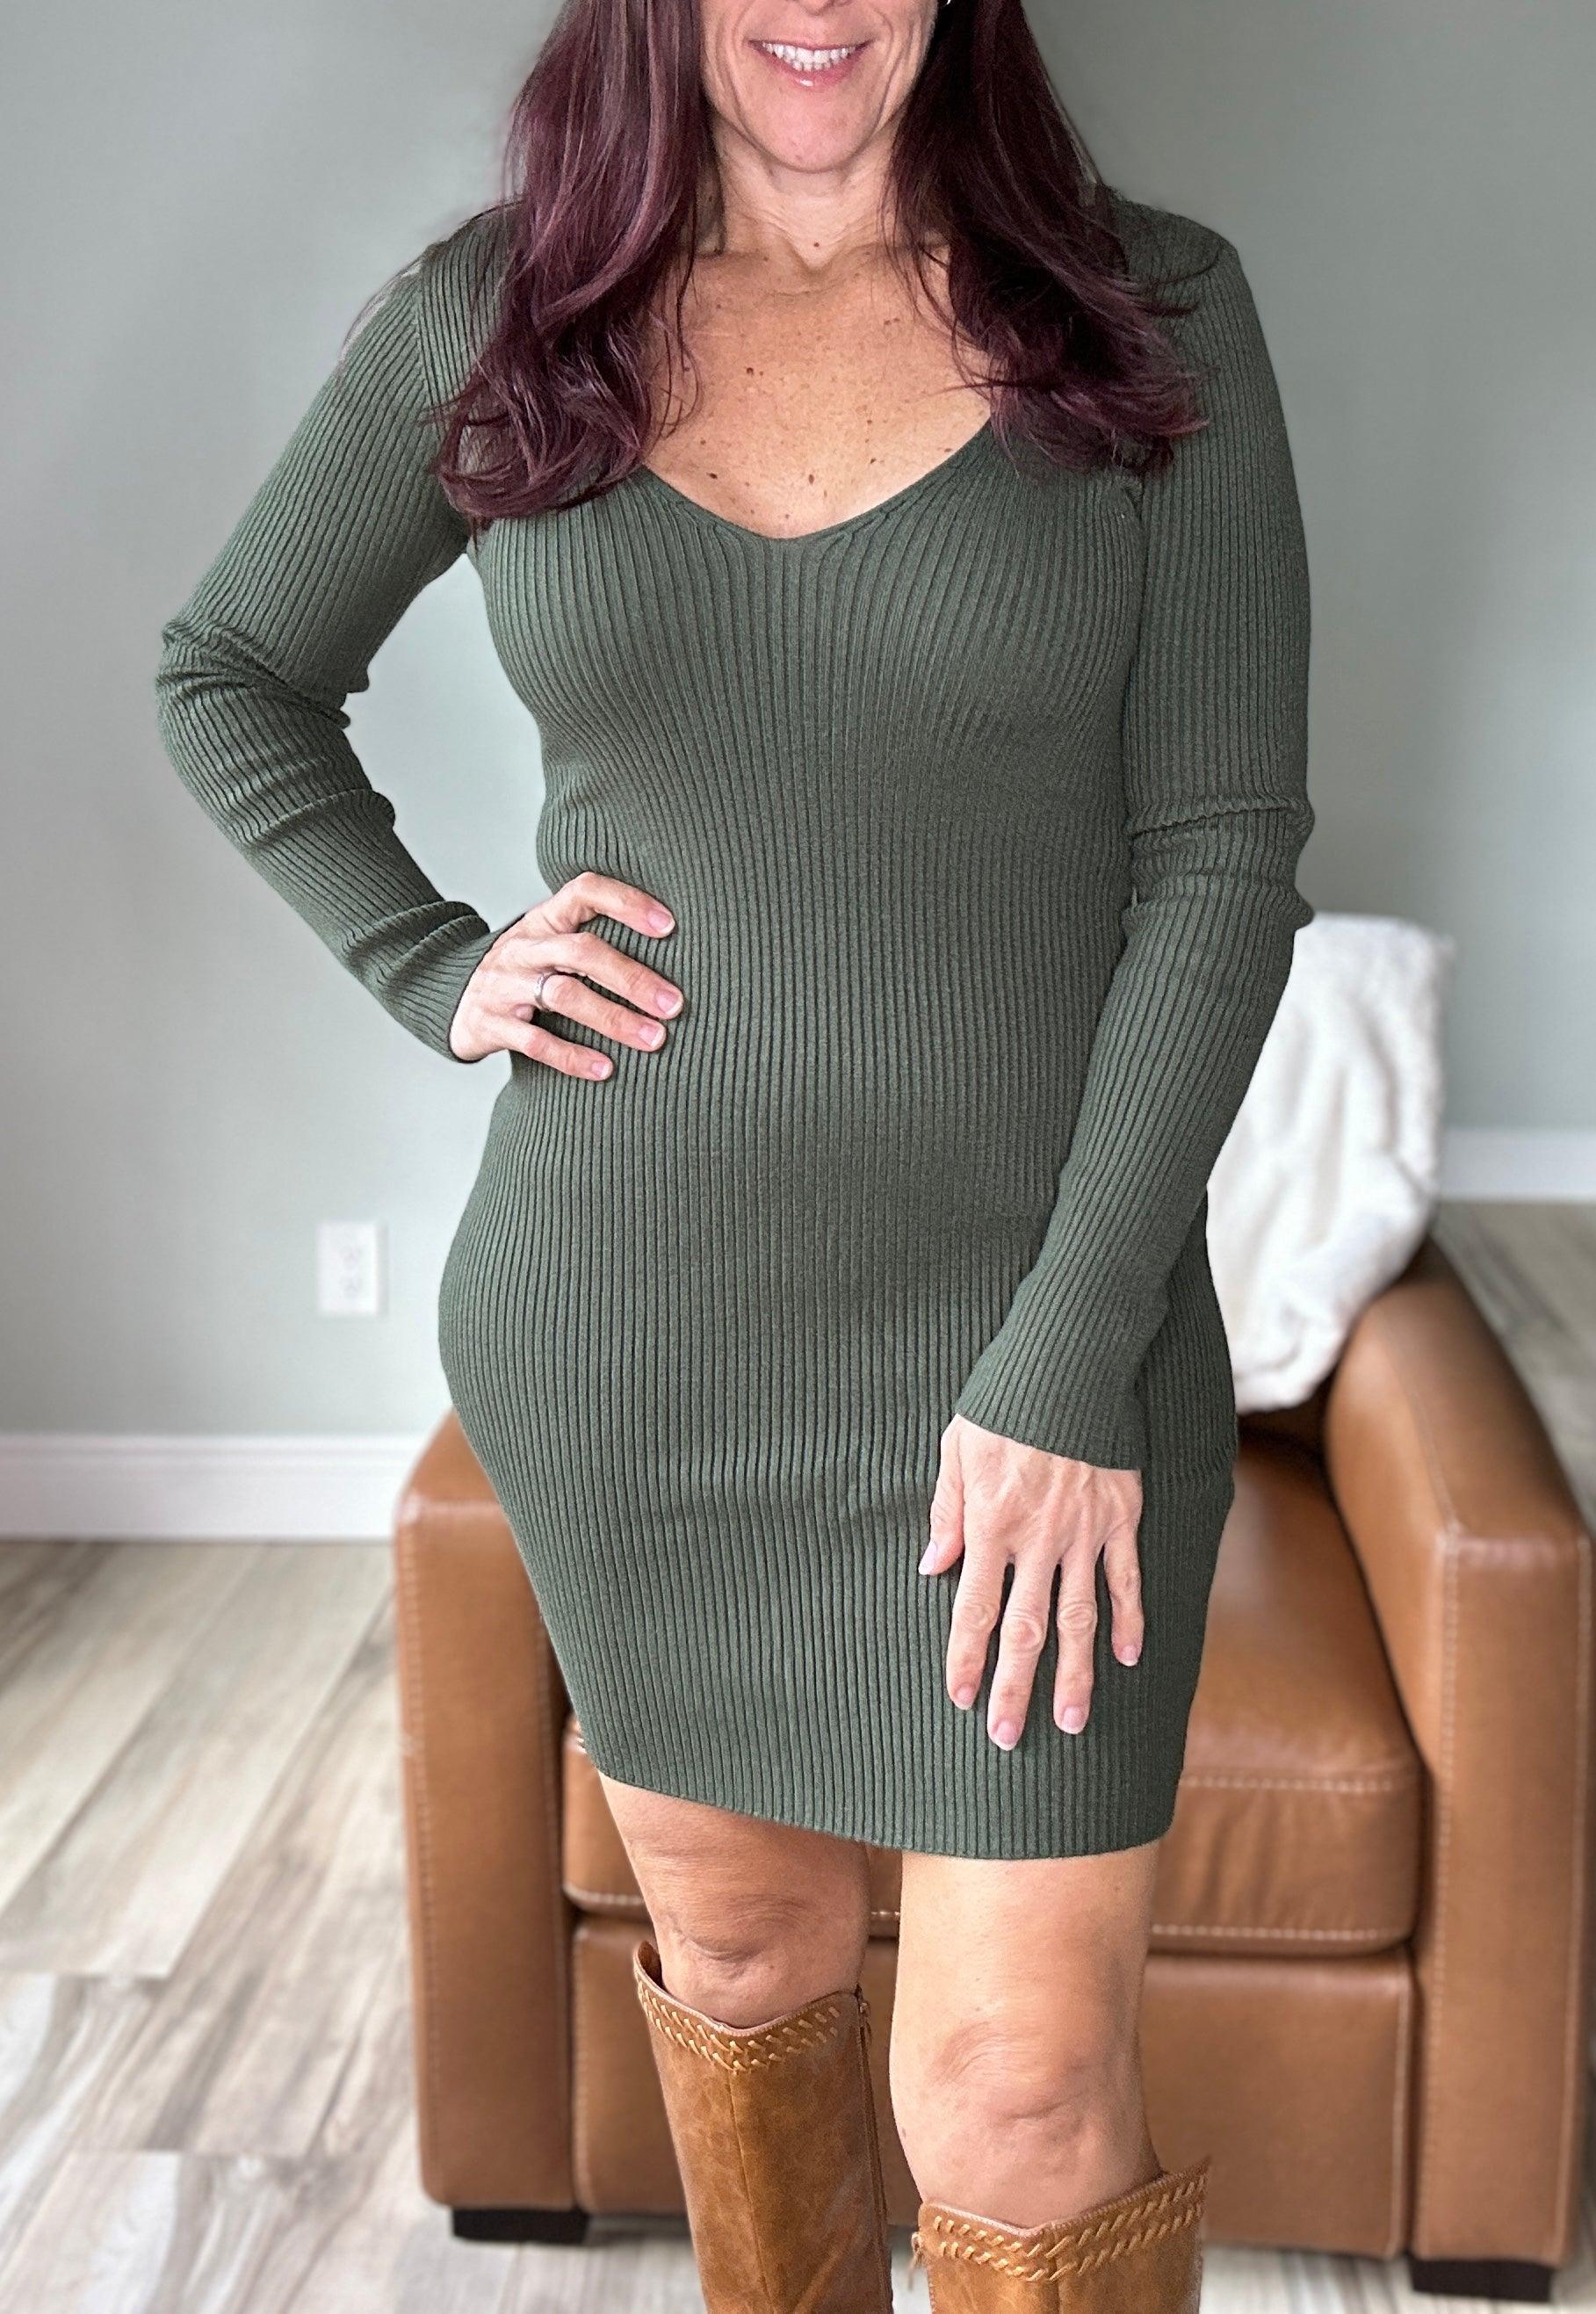 Sweater Bodycon Dress - The Salty Mare